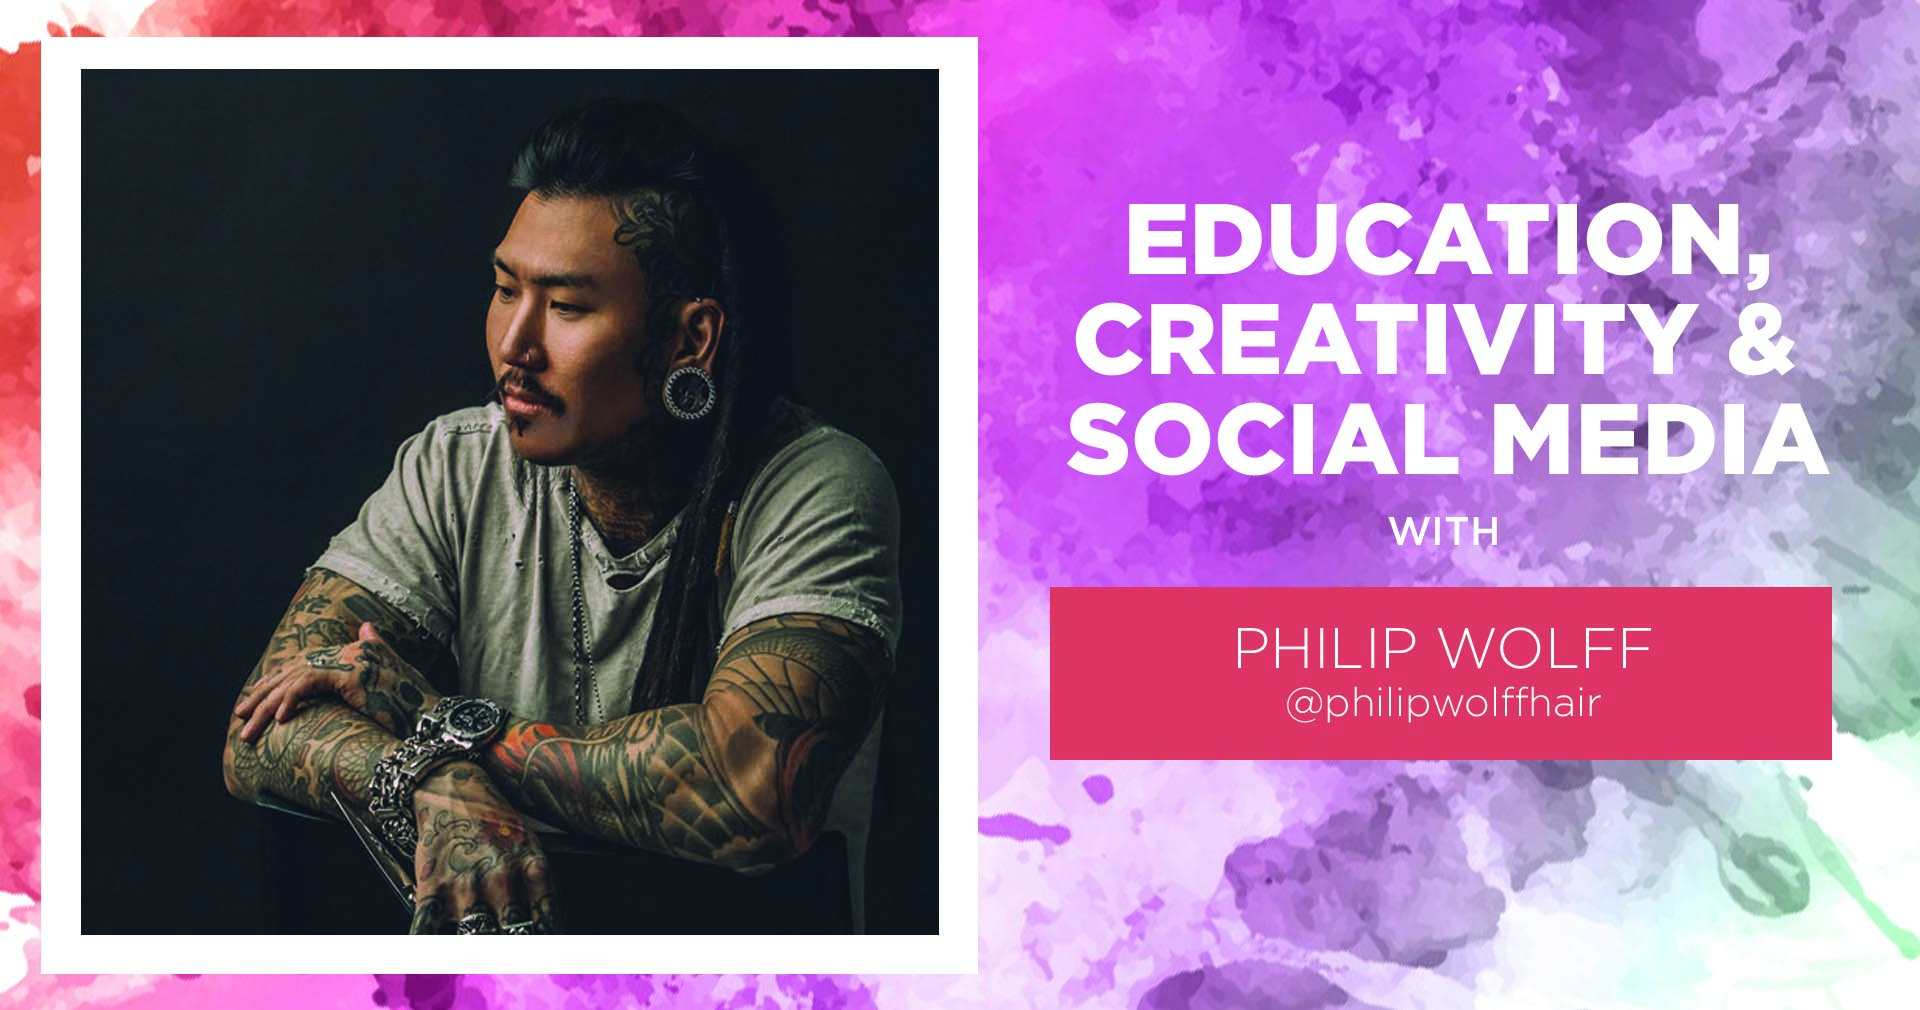 ch-philip-wolff-on-the-importance-of-education-creativity-and-influence